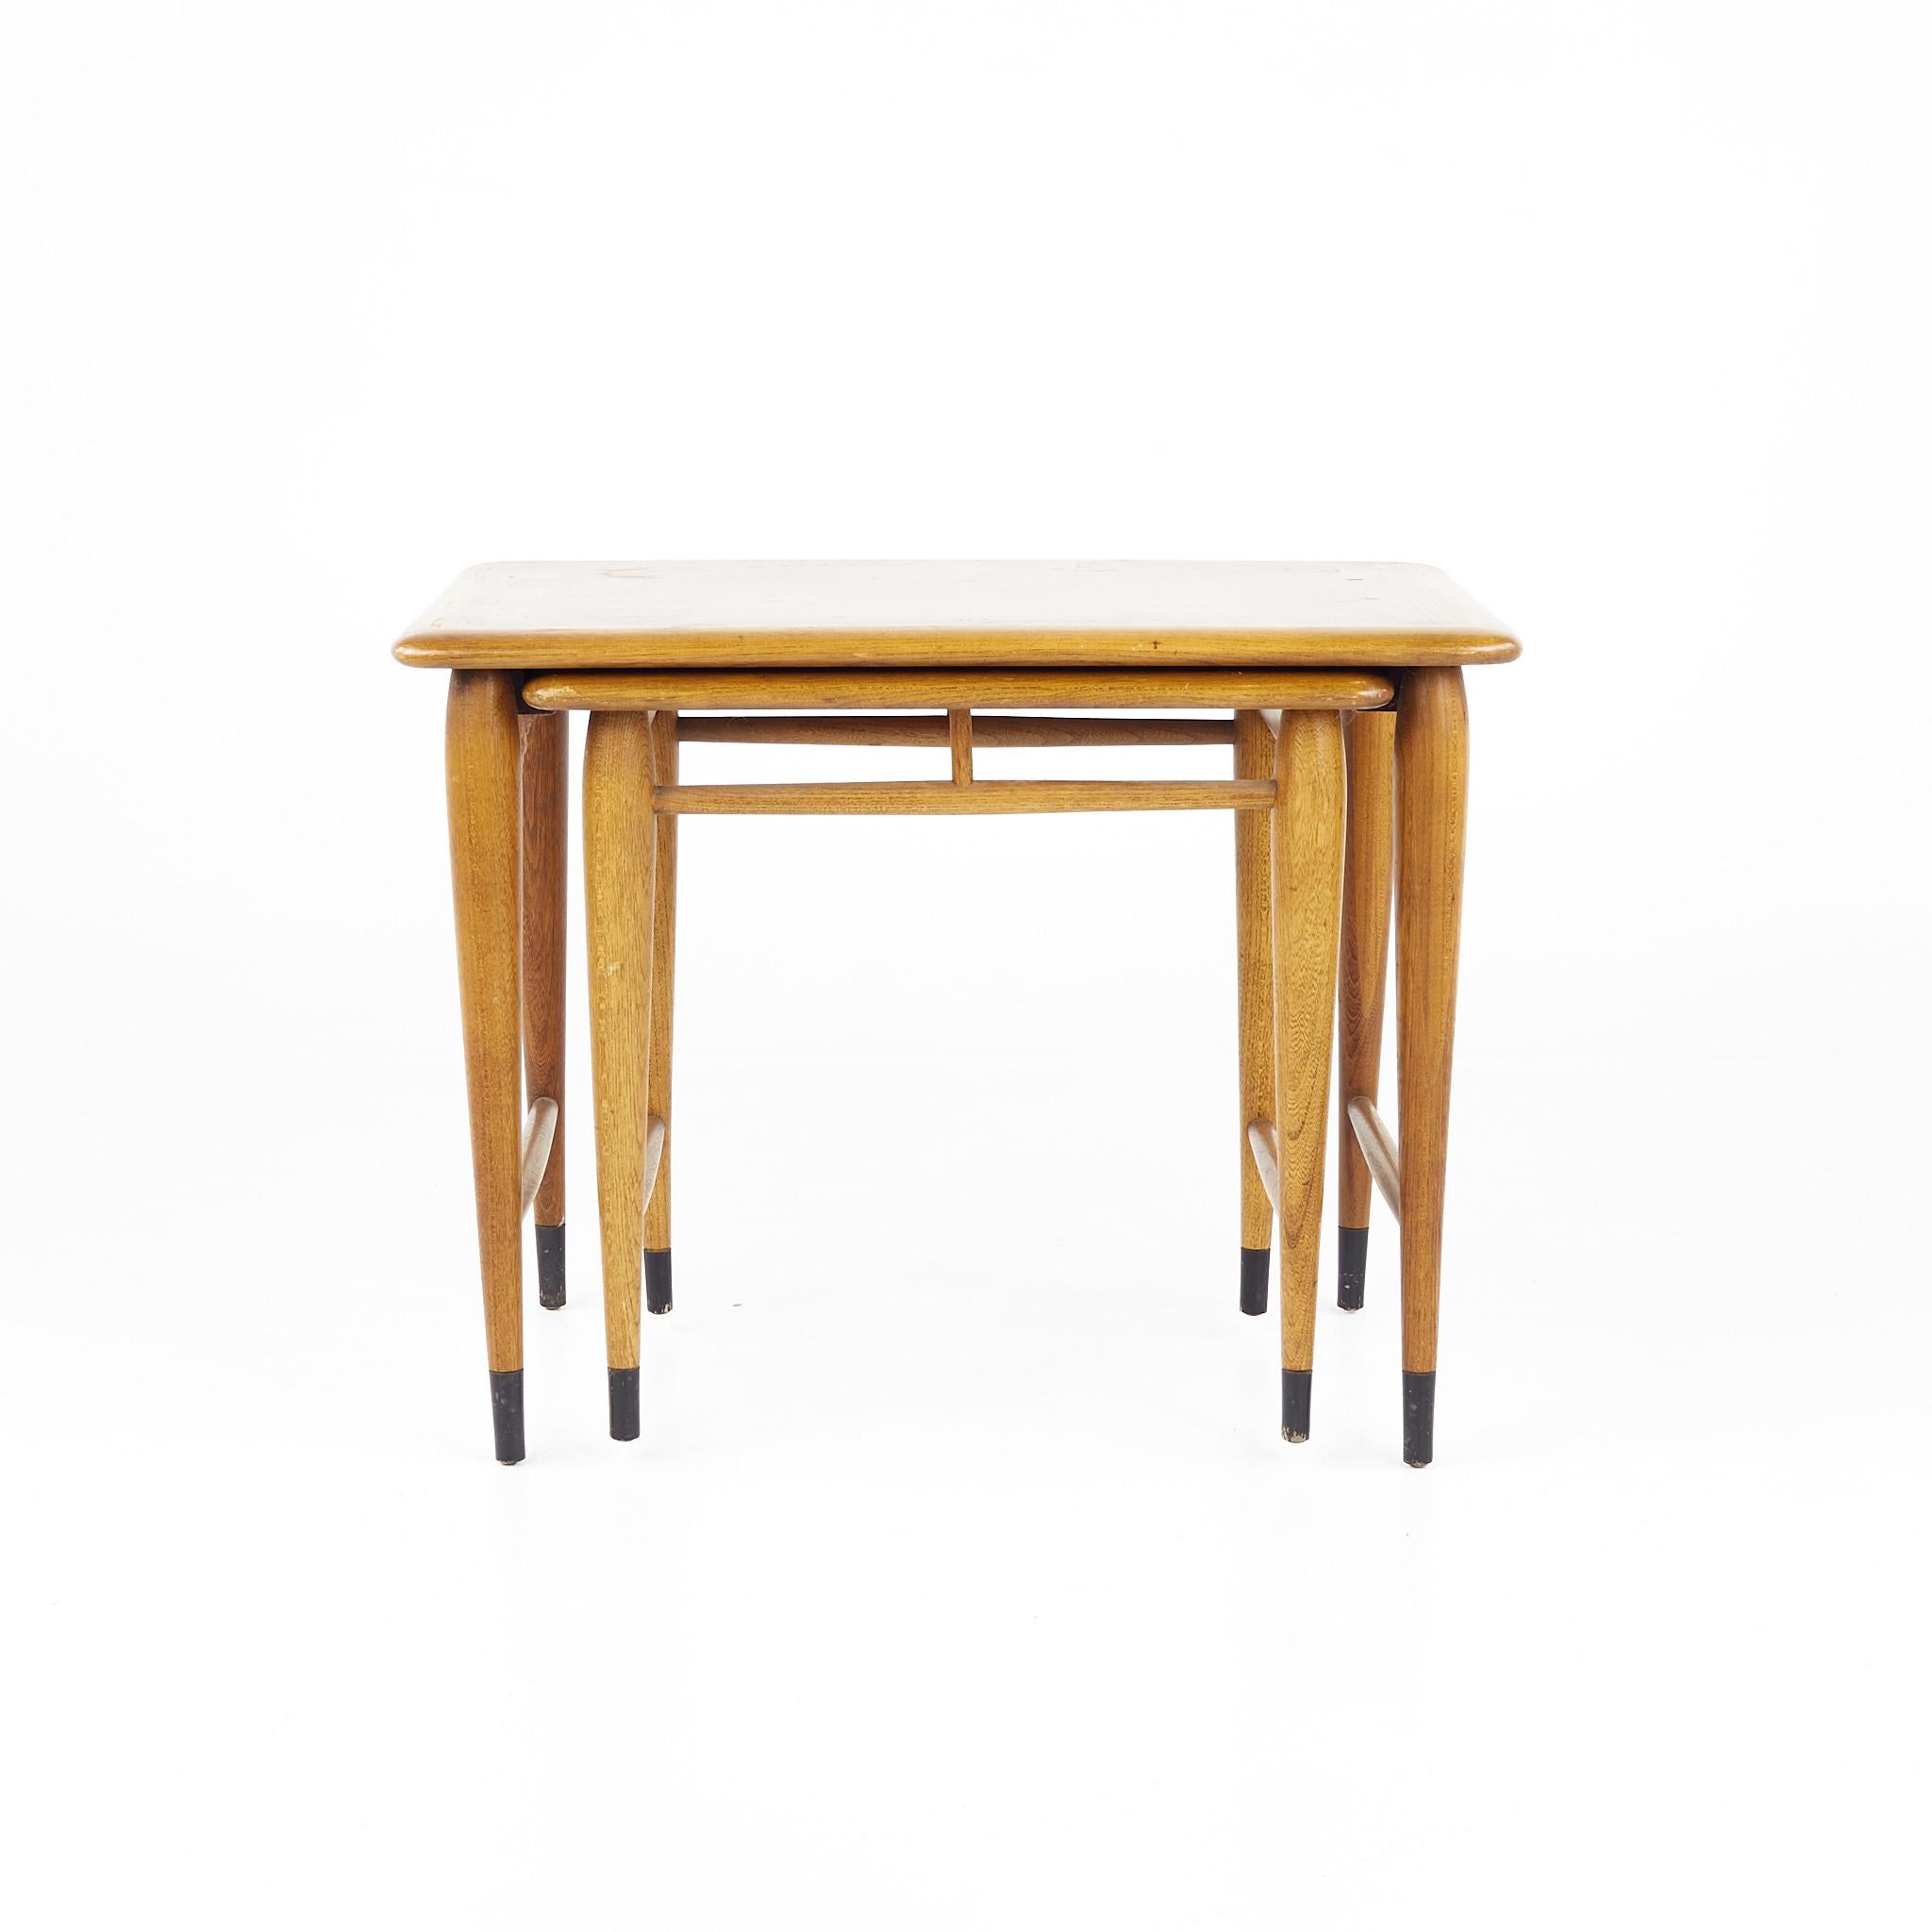 Lane Acclaim mid century walnut nesting tables

Large table measures: 26.25 wide x 17 deep x 20.5 inches high

?All pieces of furniture can be had in what we call restored vintage condition. That means the piece is restored upon purchase so it’s